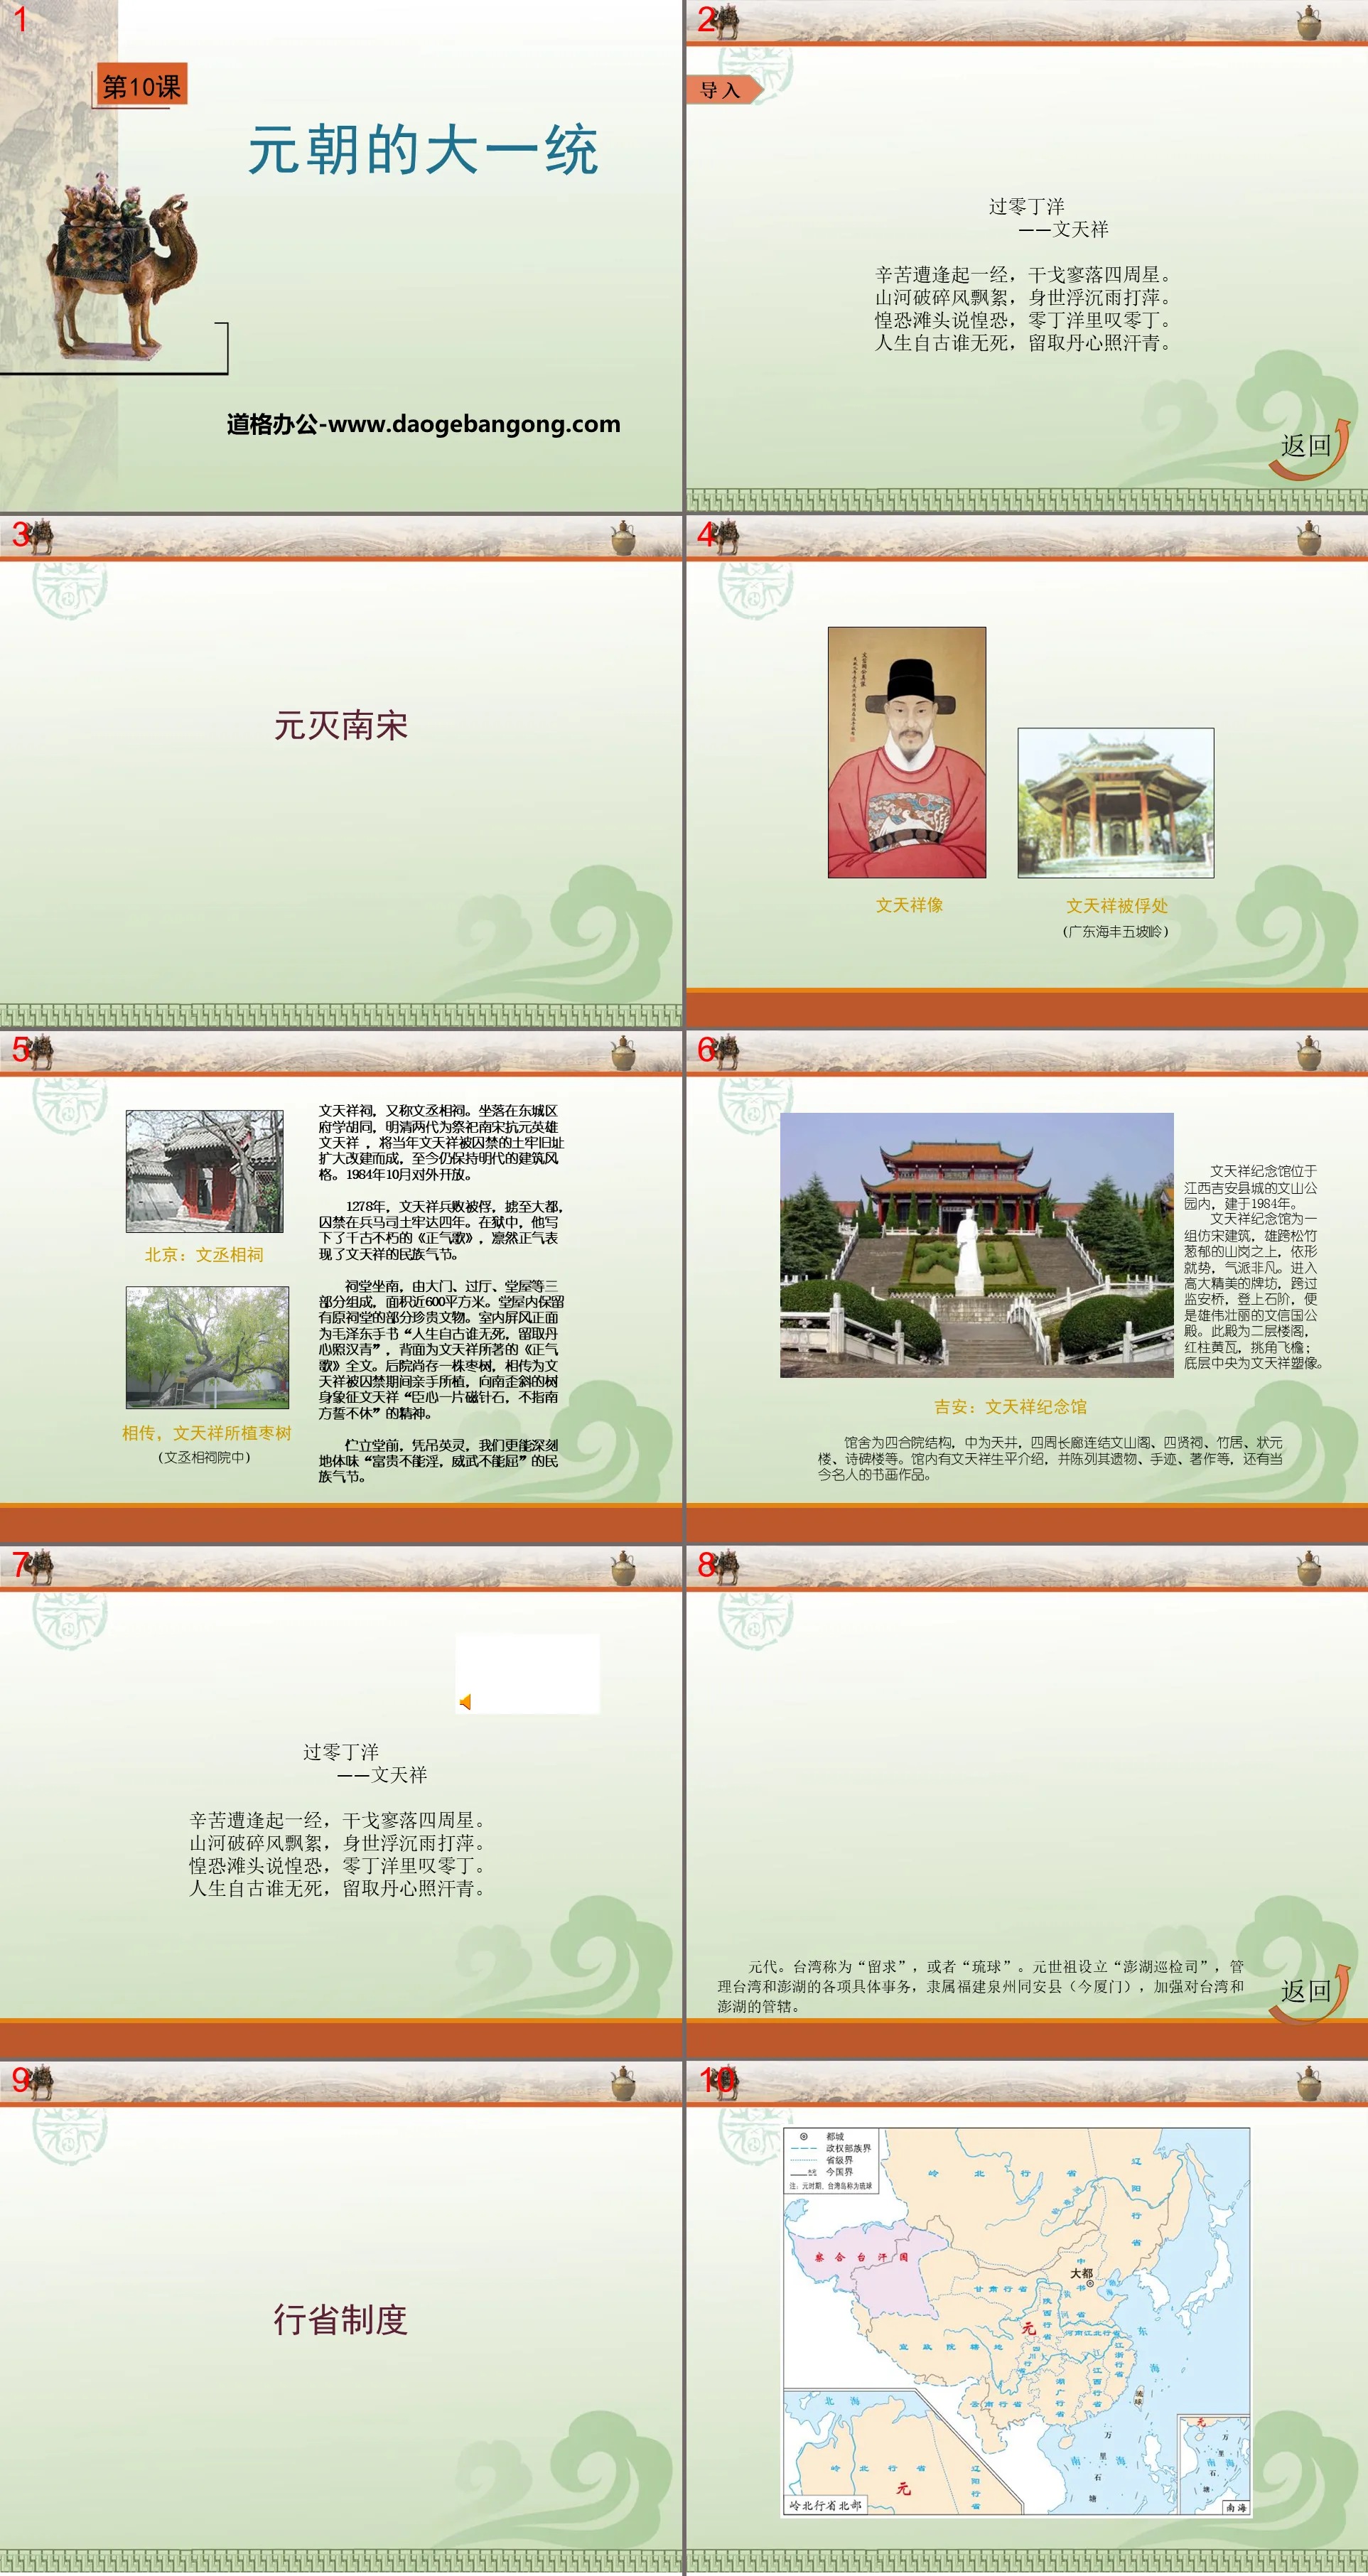 "The Unification of the Yuan Dynasty" PPT courseware 3 during the Song and Yuan Dynasties